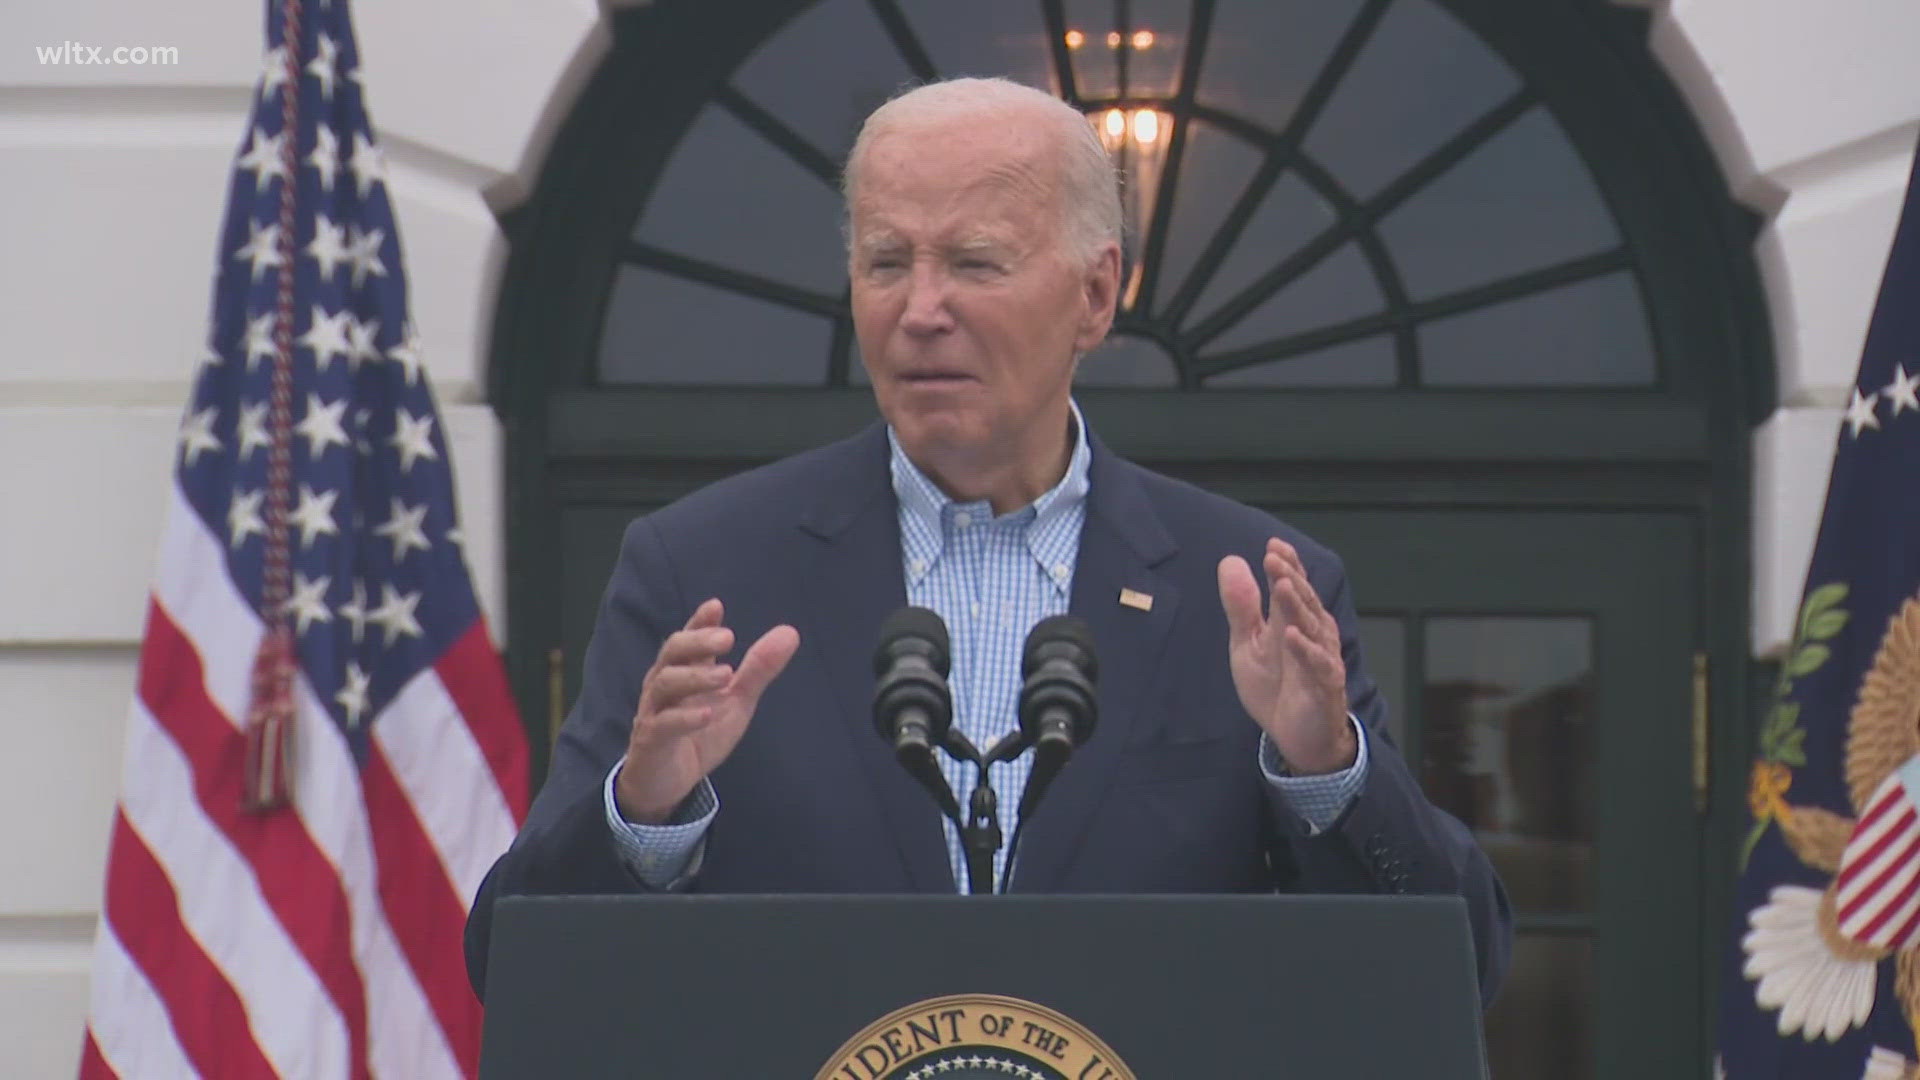 President Biden met with 20 Democratic governors Wednesday night as the White House and his reelection campaign work to shore up support for him.